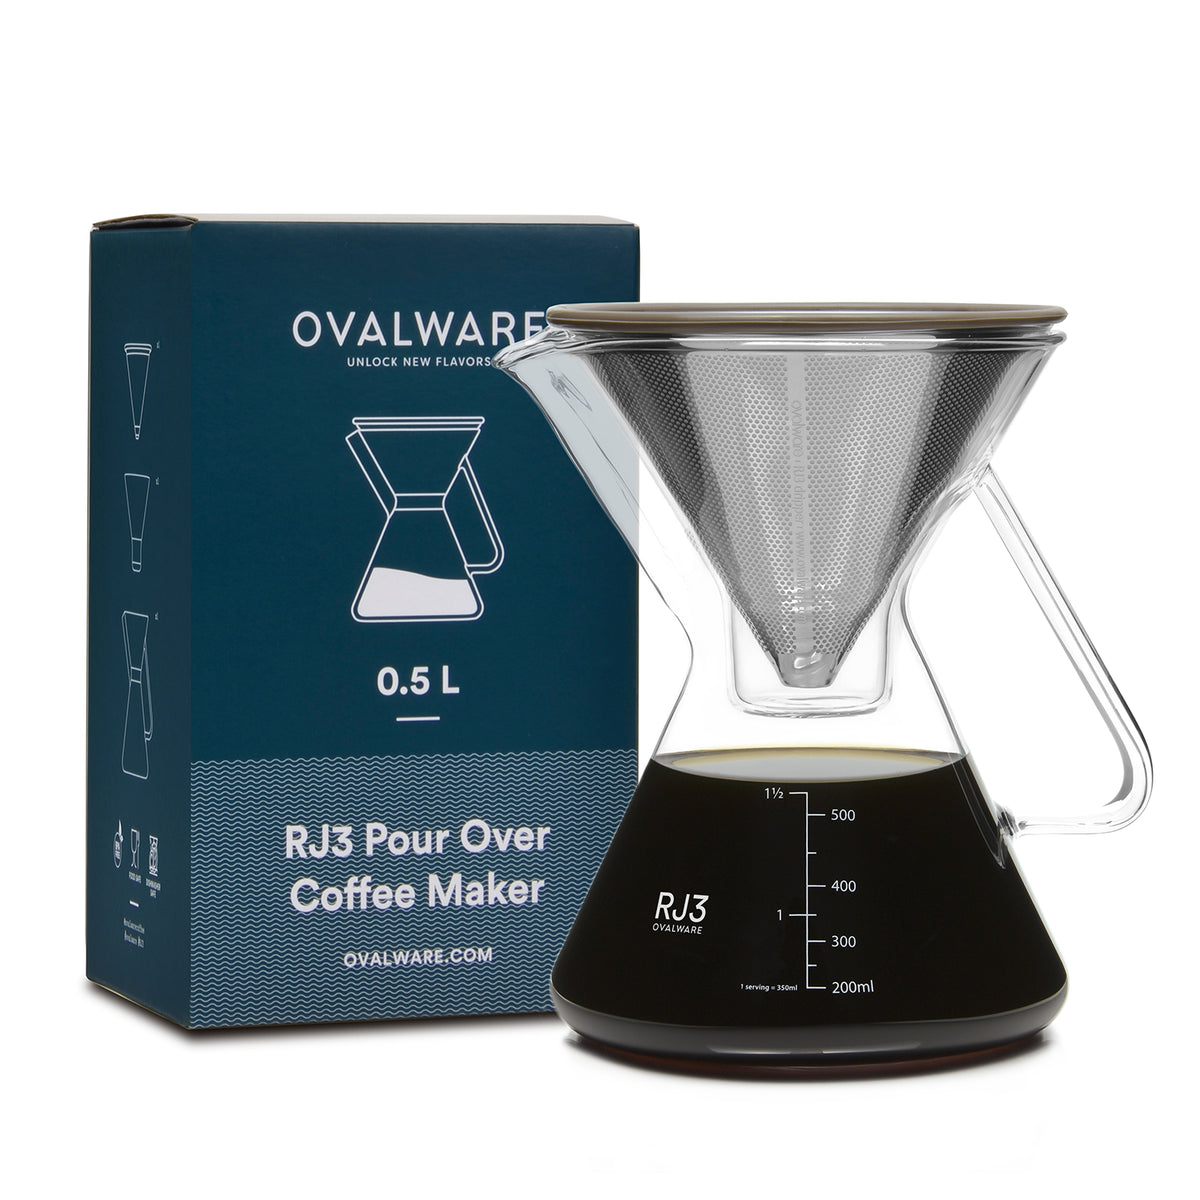 Ovalware RJ3 Pour Over Coffee Maker (with filter)